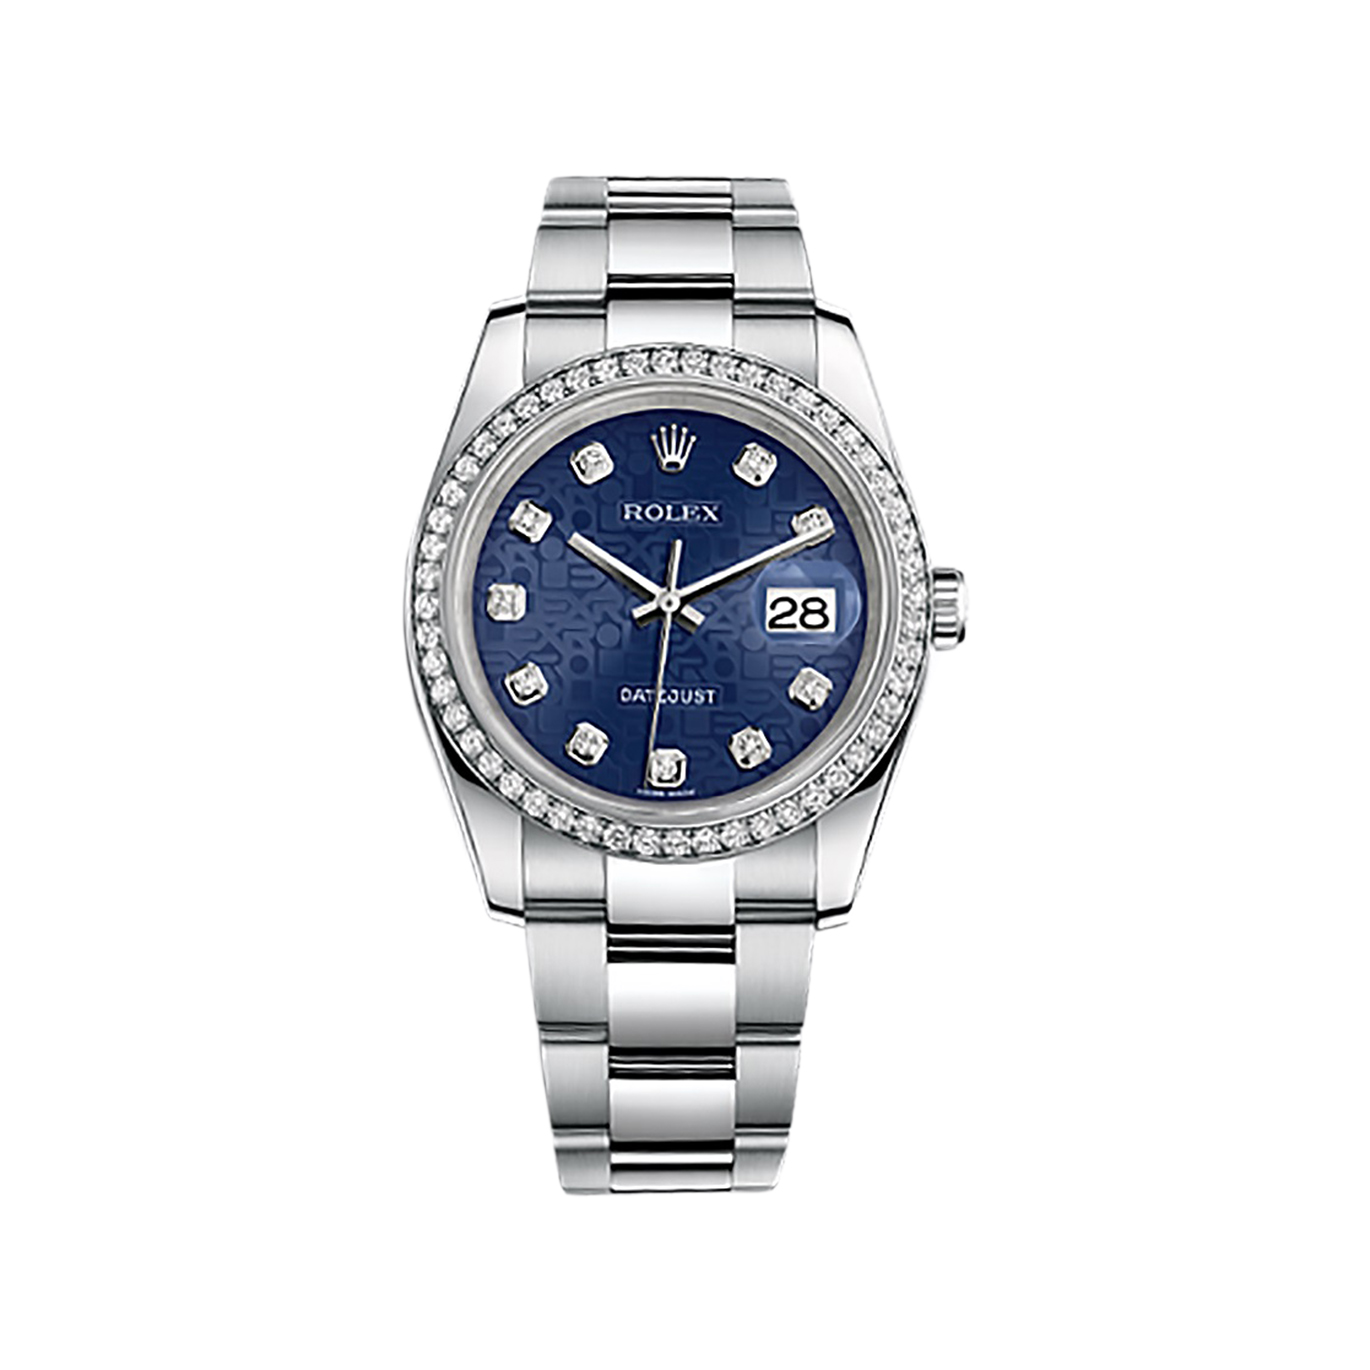 Datejust 36 116244 White Gold & Stainless Steel Watch (Blue Jubilee Design Set with Diamonds)